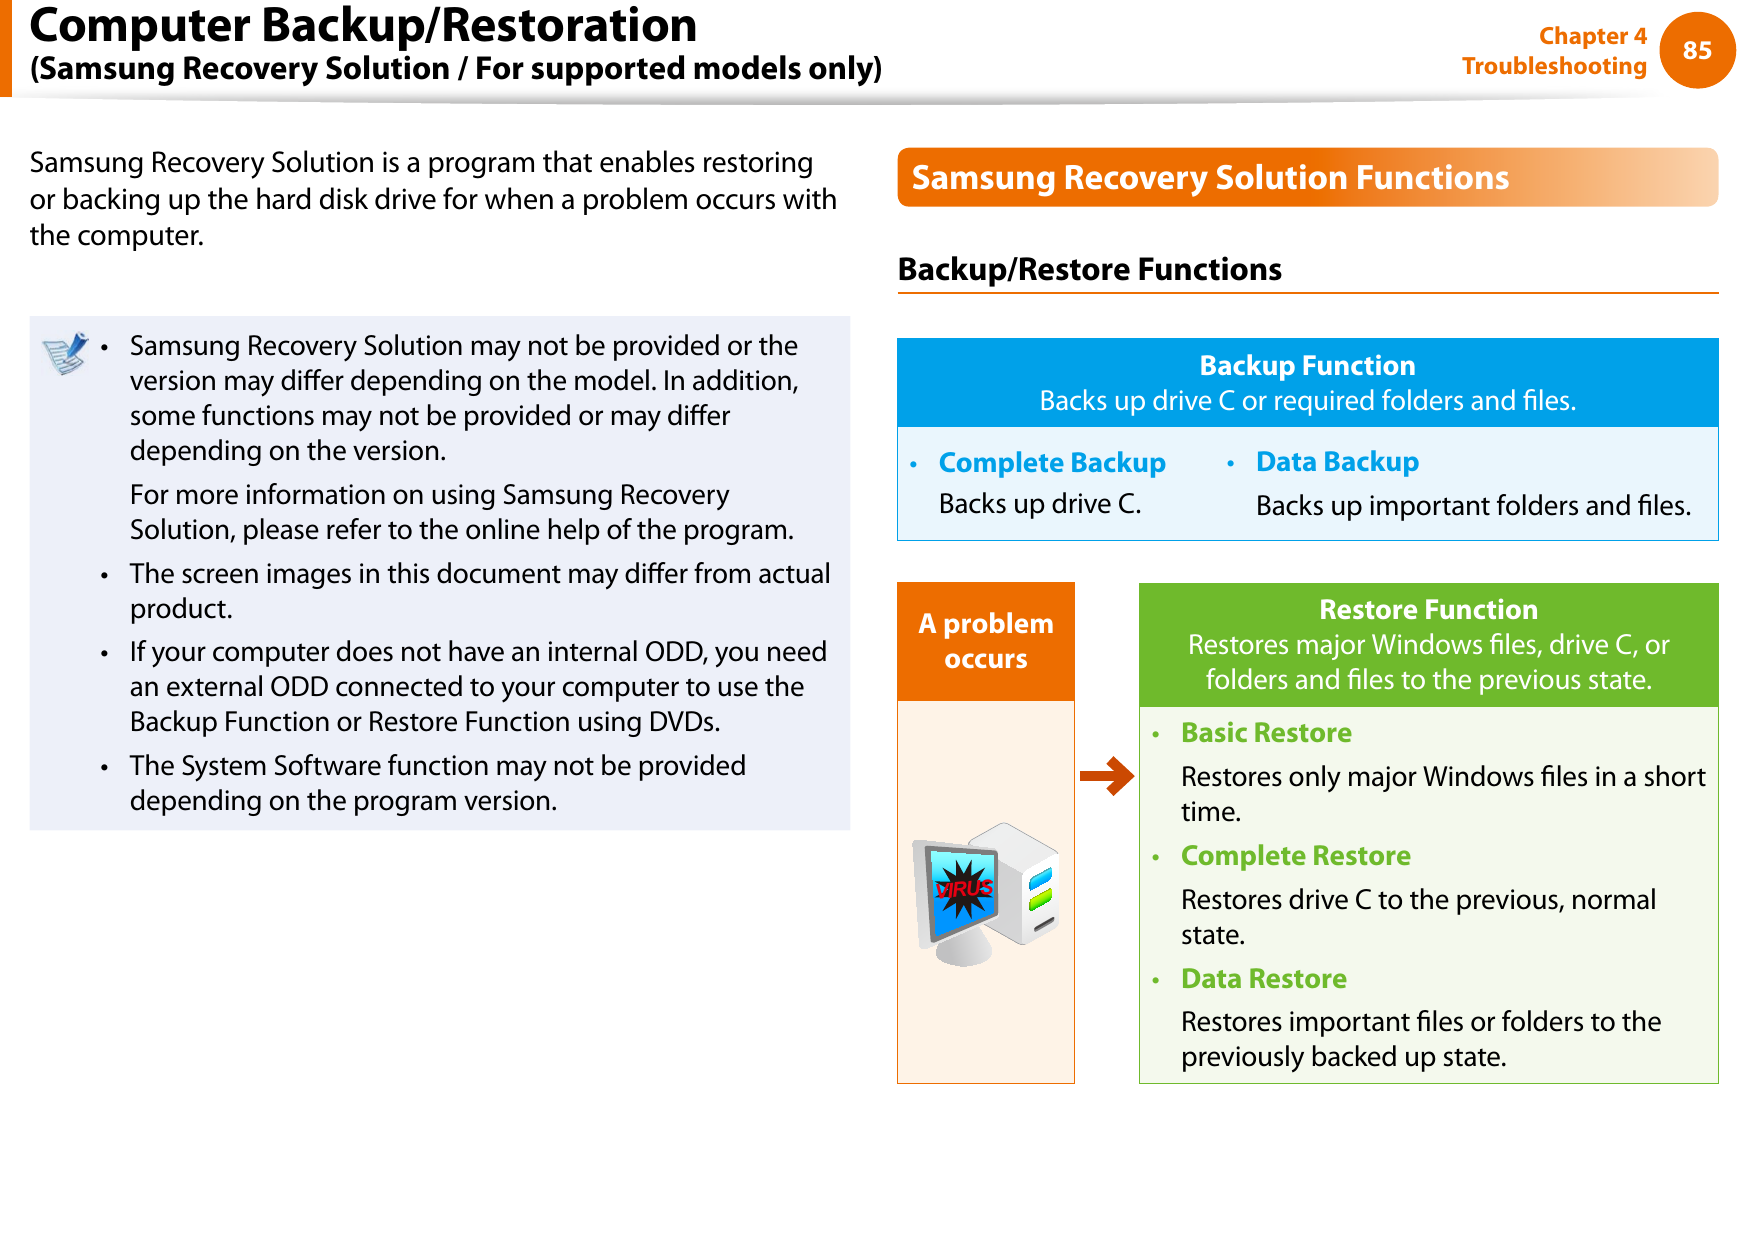 85Chapter 4 TroubleshootingComputer Backup/Restoration  (Samsung Recovery Solution / For supported models only)Samsung Recovery Solution is a program that enables restoring or backing up the hard disk drive for when a problem occurs with the computer.Samsung Recovery Solution may not be provided or the • version may dier depending on the model. In addition, some functions may not be provided or may dier depending on the version.  For more information on using Samsung Recovery Solution, please refer to the online help of the program.The screen images in this document may dier from actual • product.If your computer does not have an internal ODD, you need • an external ODD connected to your computer to use the Backup Function or Restore Function using DVDs.The System Software function may not be provided • depending on the program version.Samsung Recovery Solution FunctionsBackup/Restore FunctionsBackup Function Backs up drive C or required folders and les.Complete Backup•   Backs up drive C.Data Backup•   Backs up important folders and les.A problem occursV I R U SRestore Function Restores major Windows les, drive C, or folders and les to the previous state.Basic Restore•   Restores only major Windows les in a short time.Complete Restore•   Restores drive C to the previous, normal state.Data Restore•   Restores important les or folders to the previously backed up state.